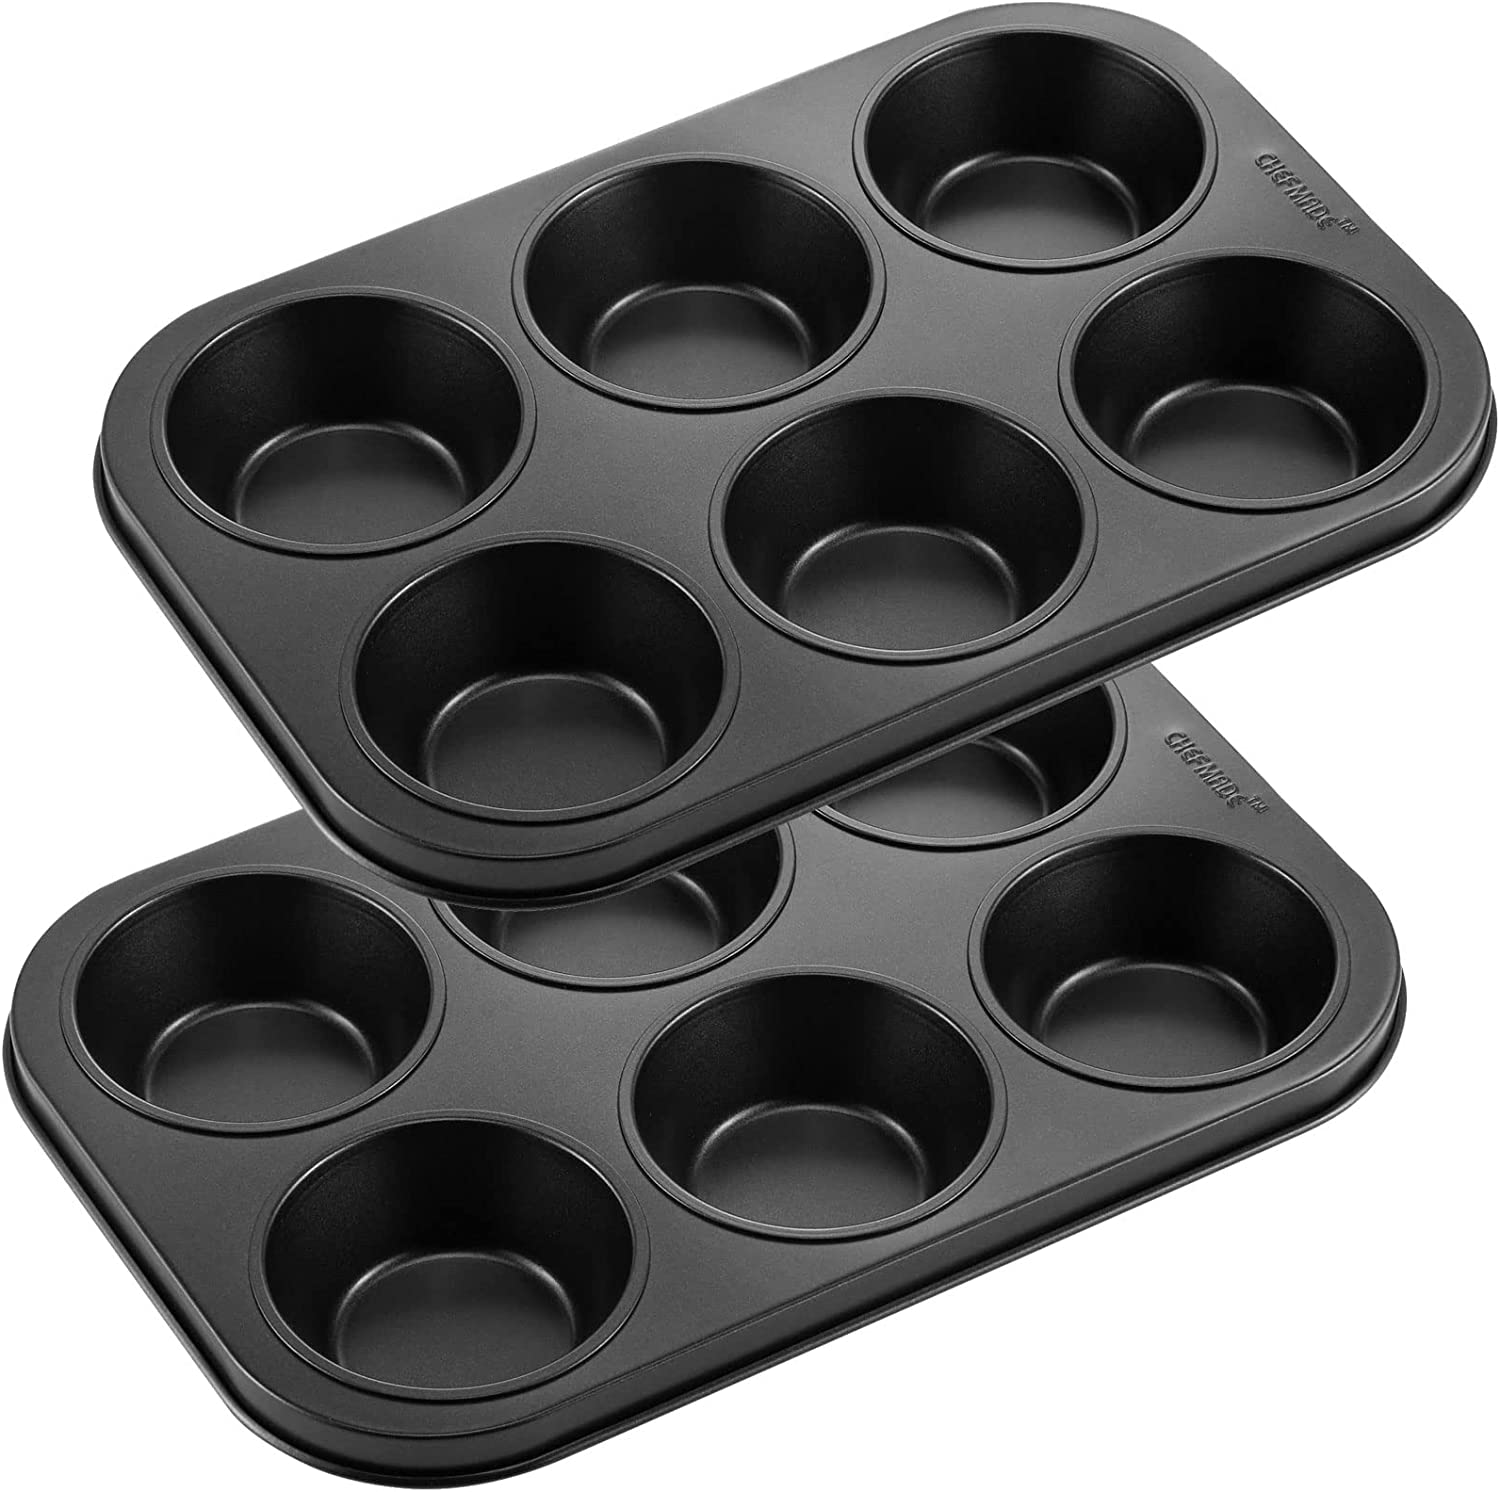 4 4Pcs Mushroom Muffin Mold - CHEFMADE official store